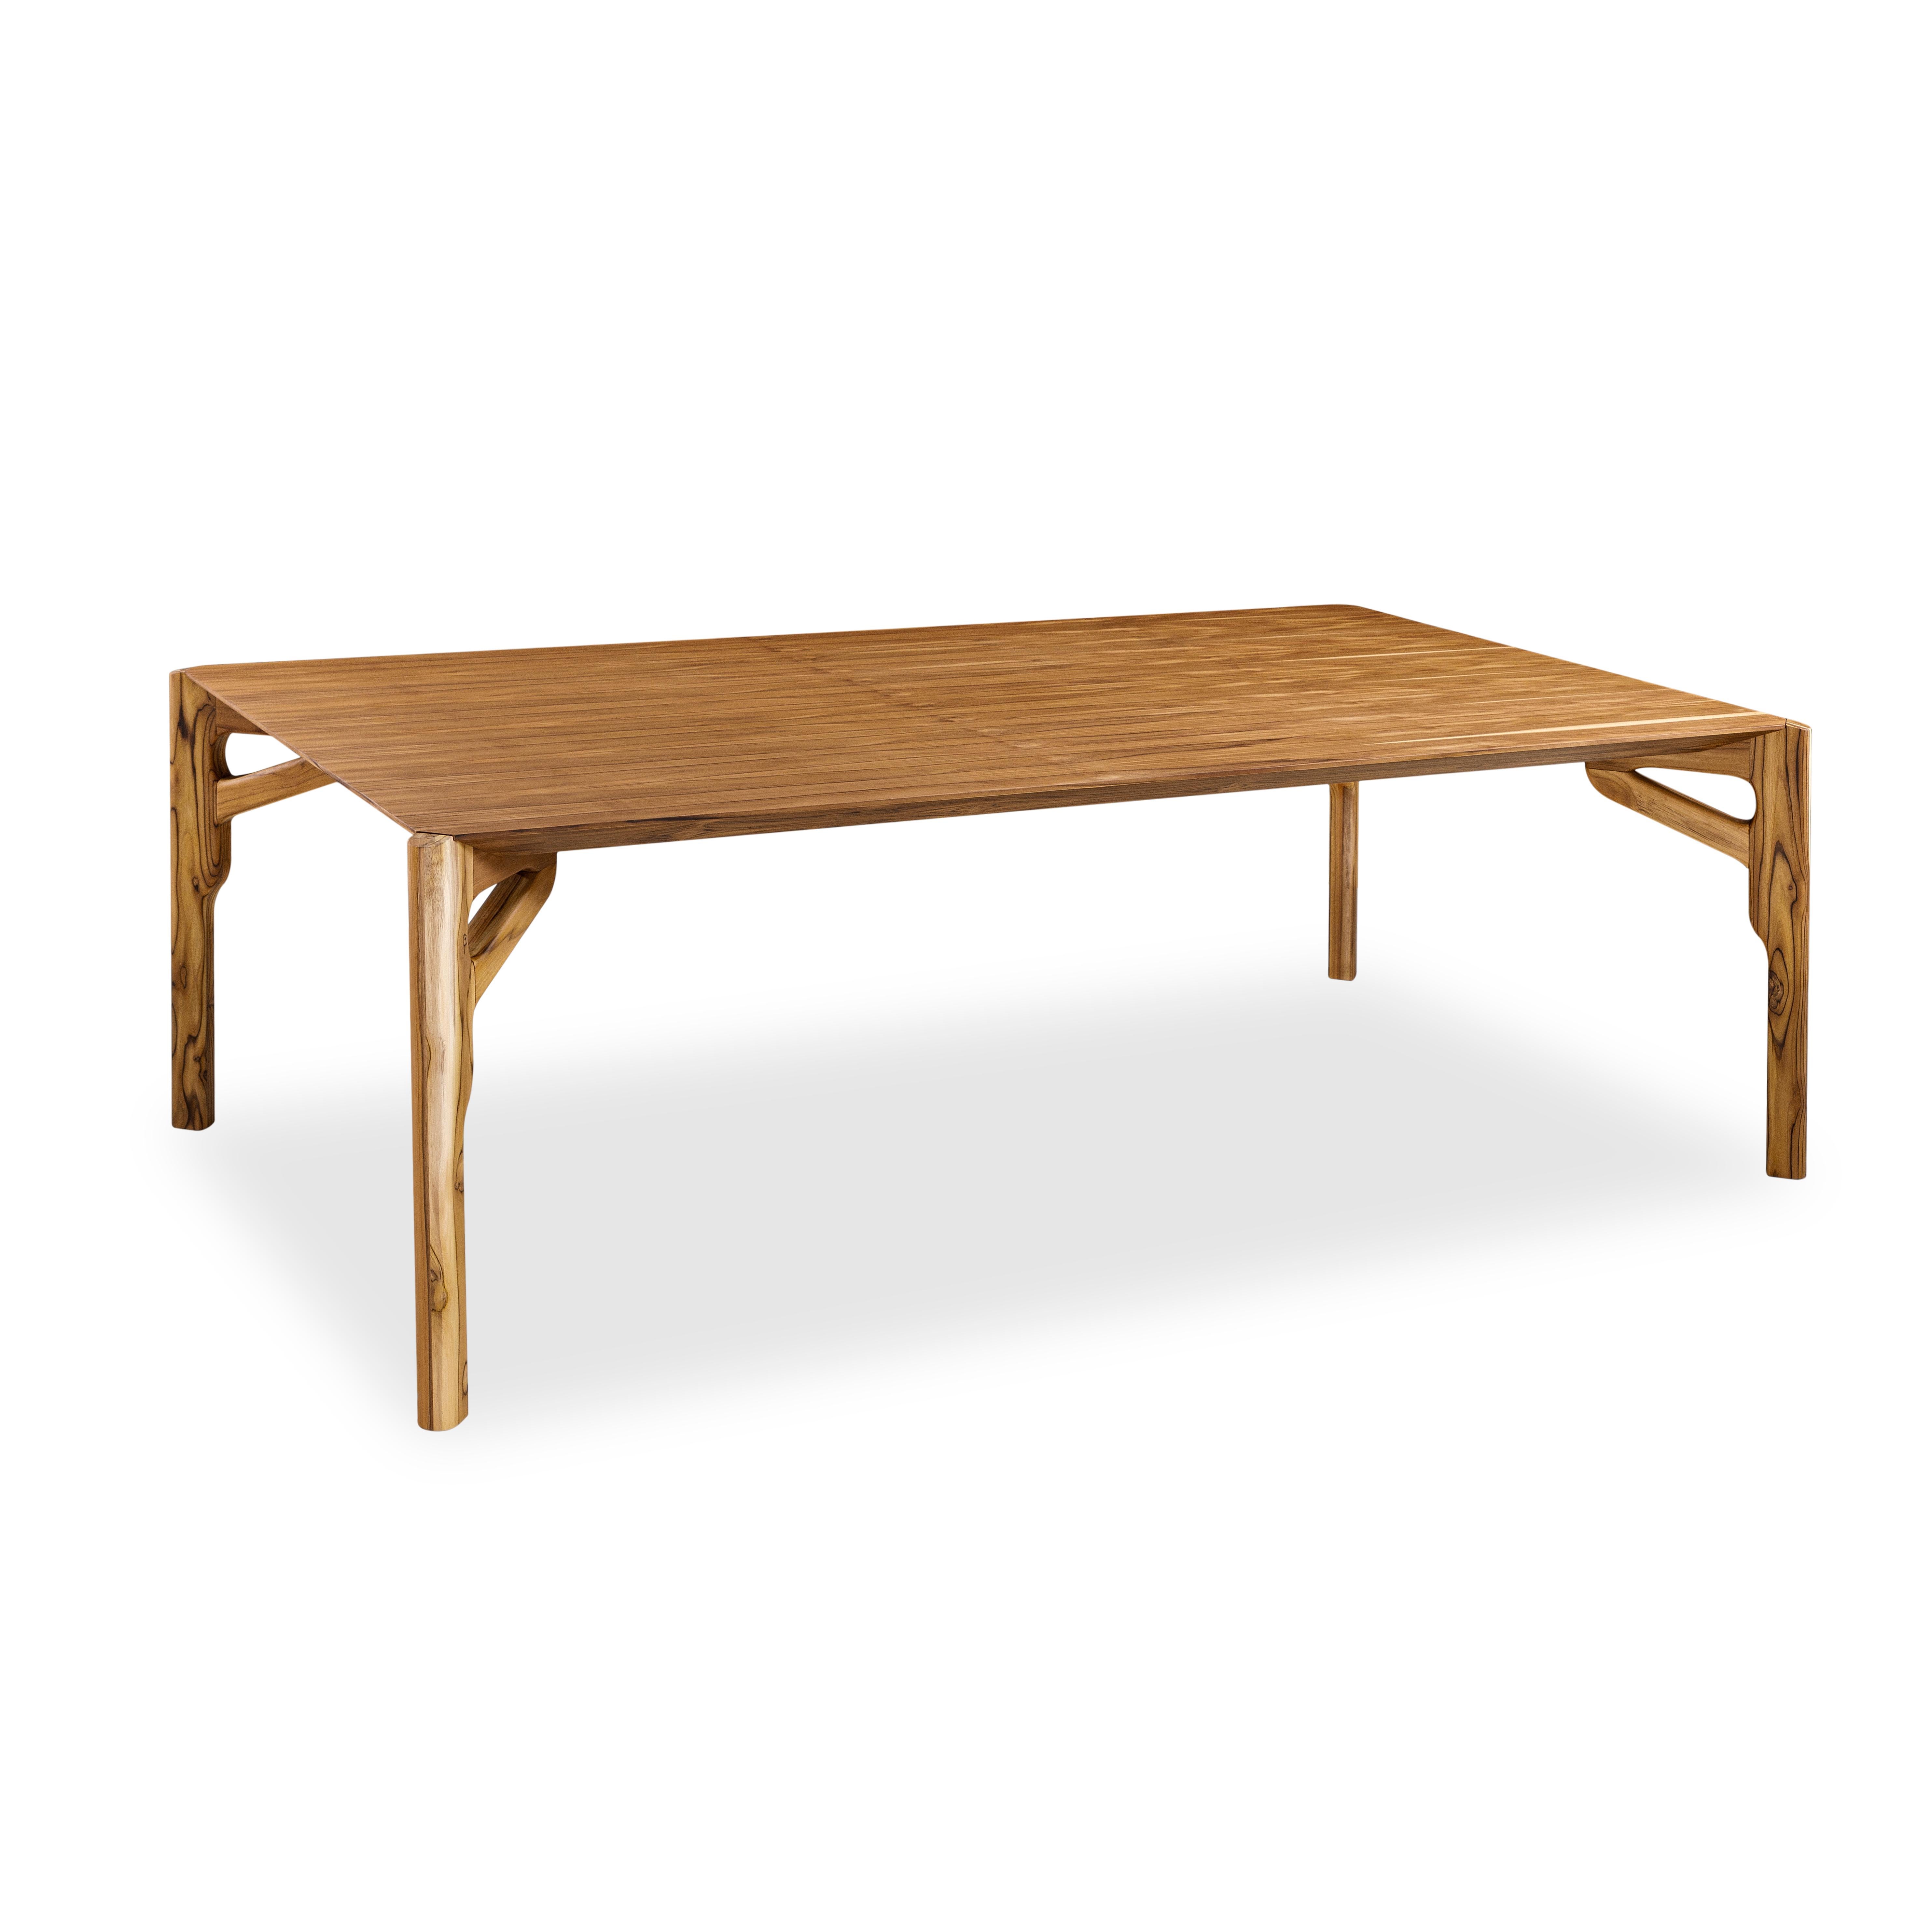 Brazilian Hawk Dining Table with a Teak Wood Veneered Table Top 86'' For Sale